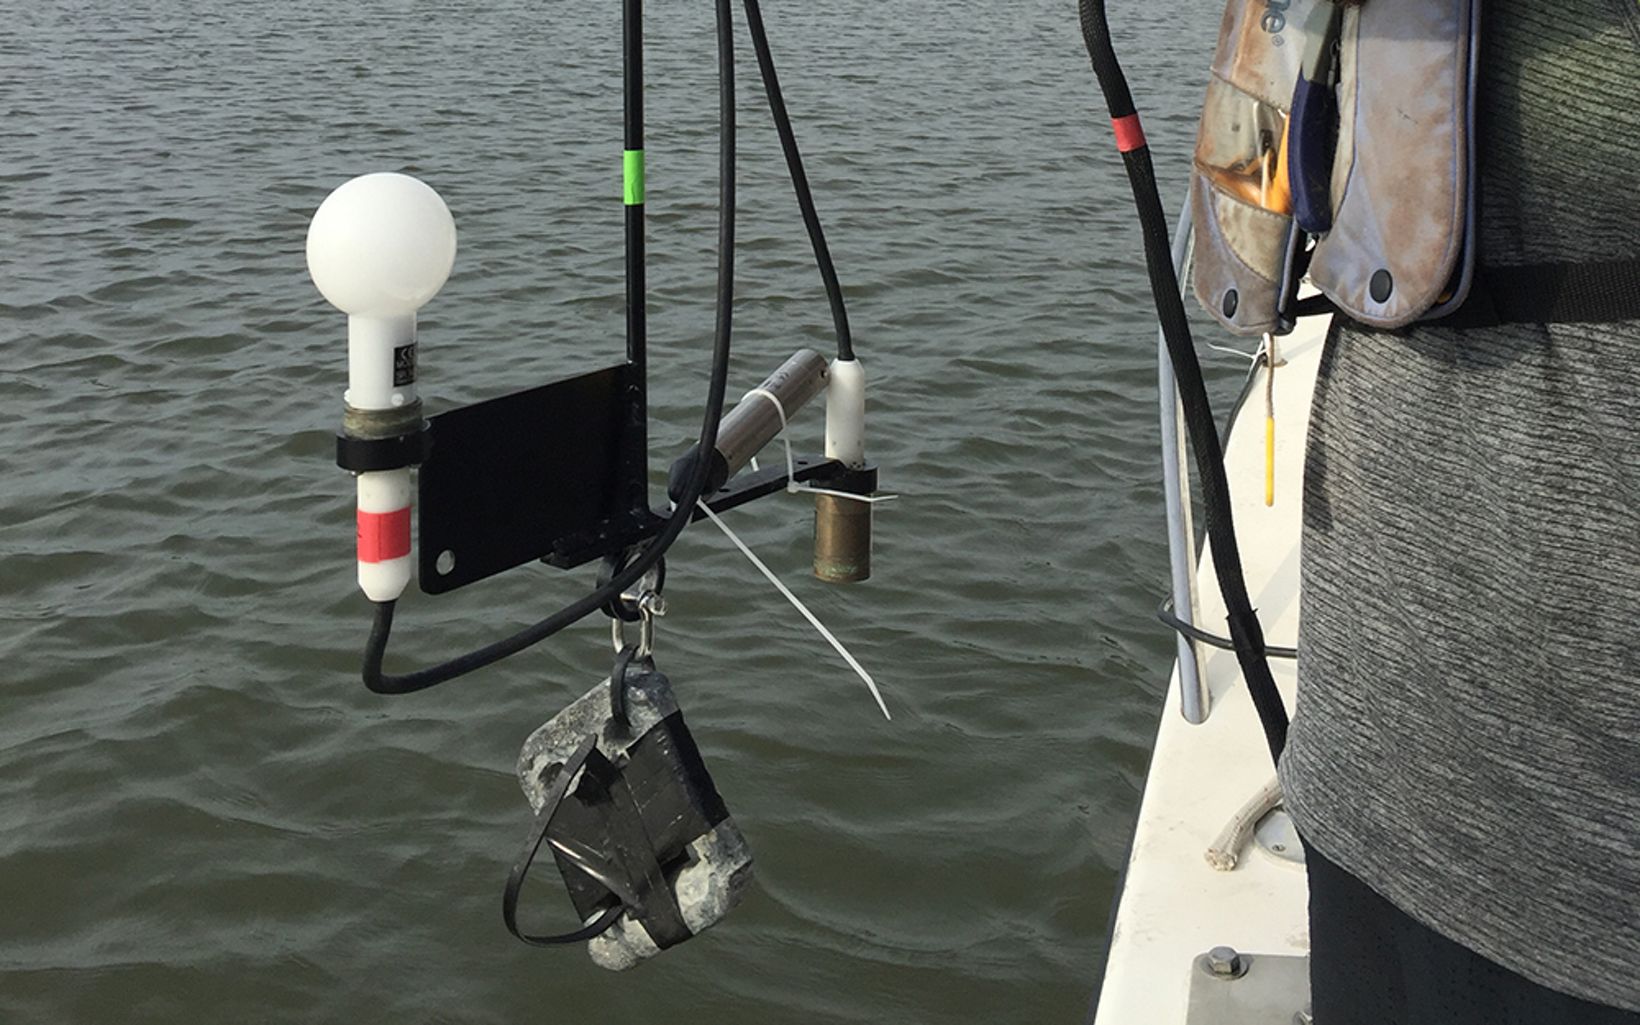 Scientists lower this sensor over the side of the boat to determine both how much light is being absorbed and how much is being scattered by particles in the water.